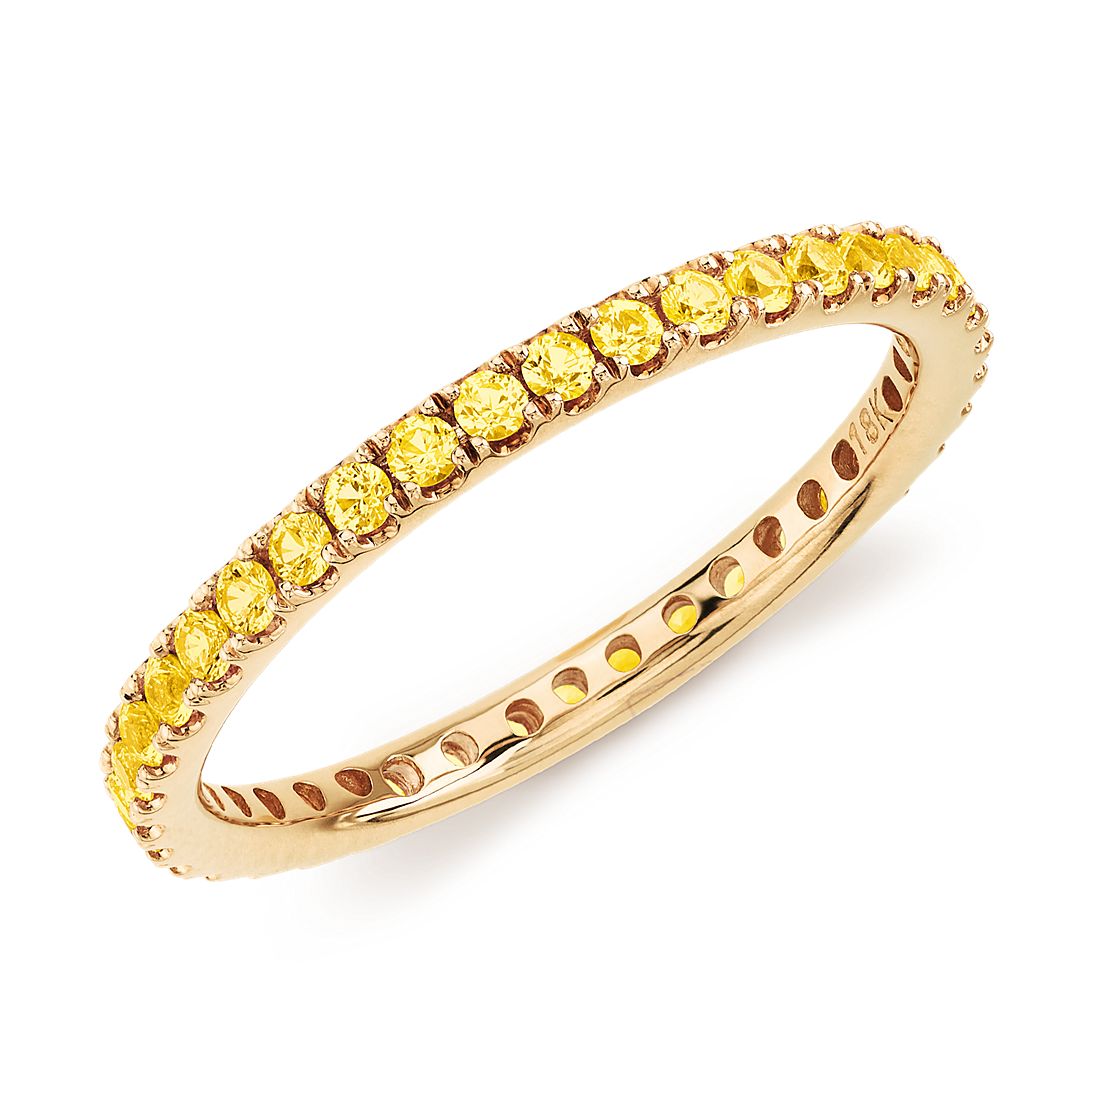 Riviera Pavé Yellow Sapphire Eternity Ring in 18k Yellow Gold (1.5mm)